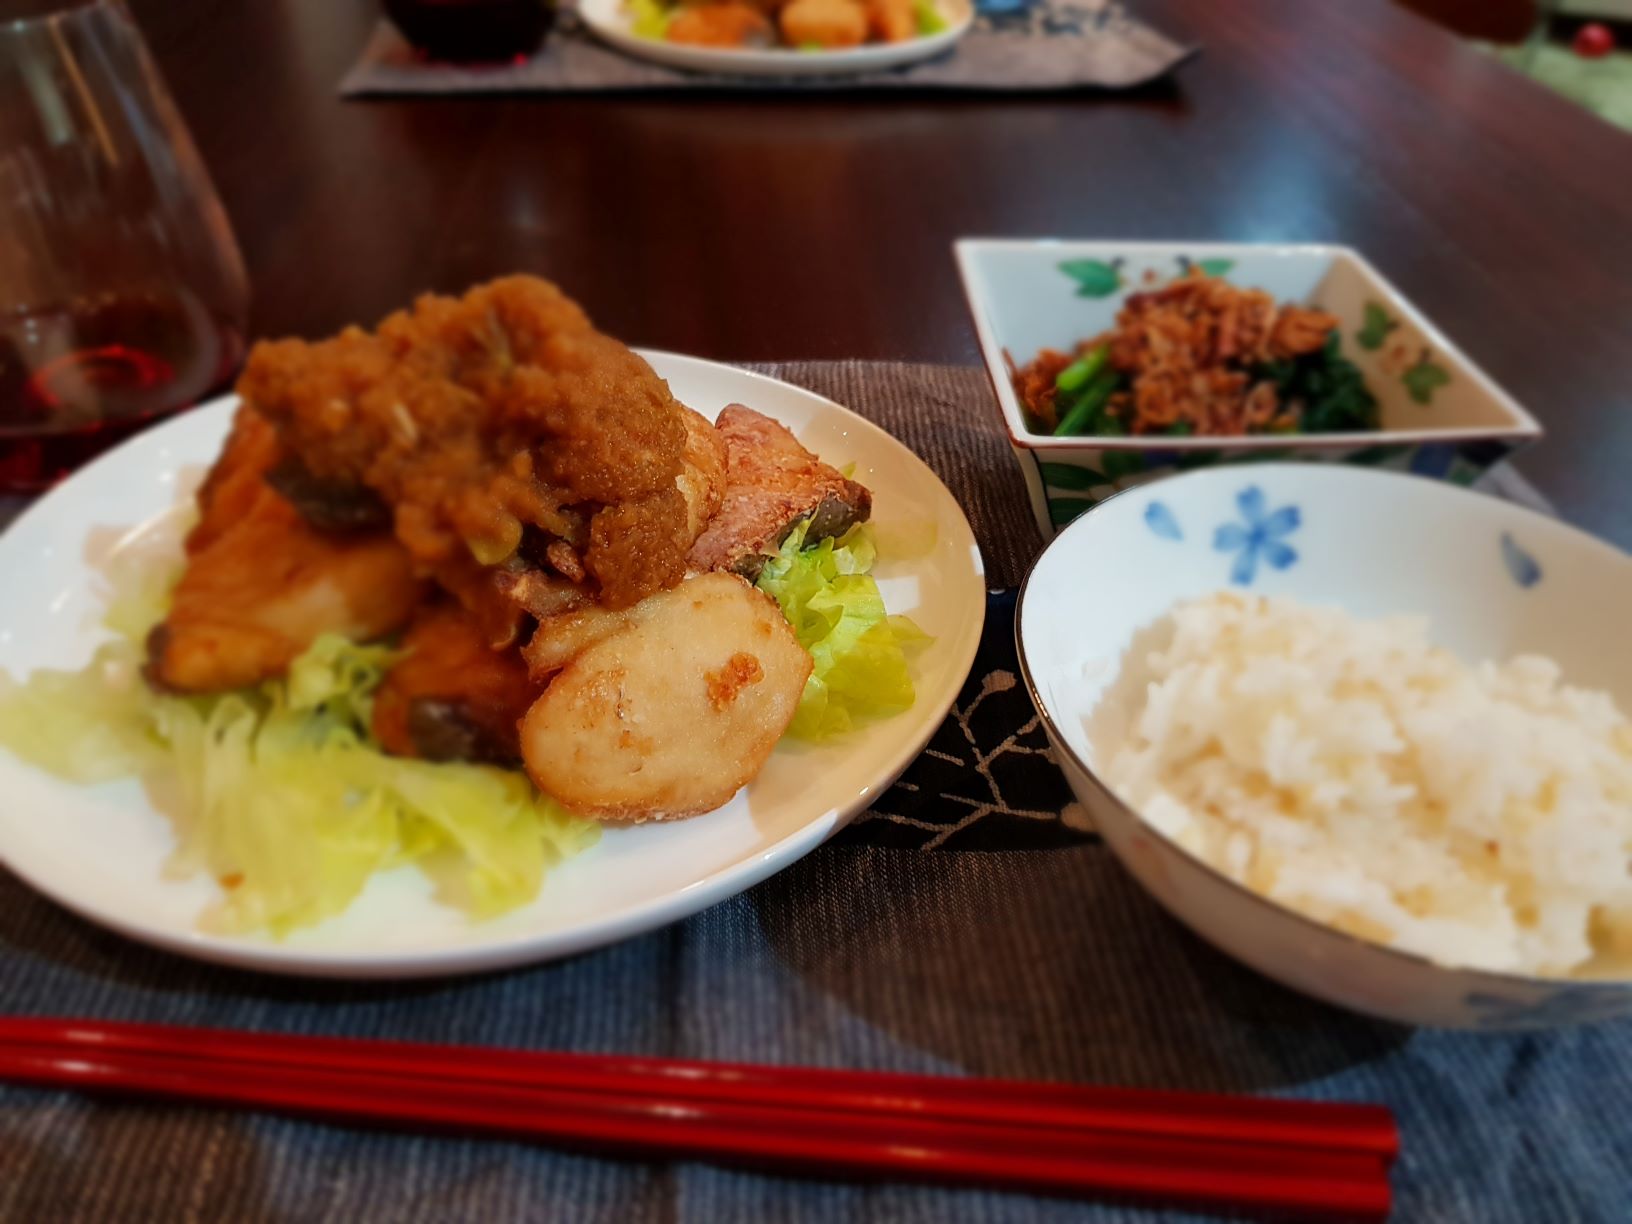 Journey to the East, Japanese home cooking recipes for fish, fried swordfish with grated daikon sauce